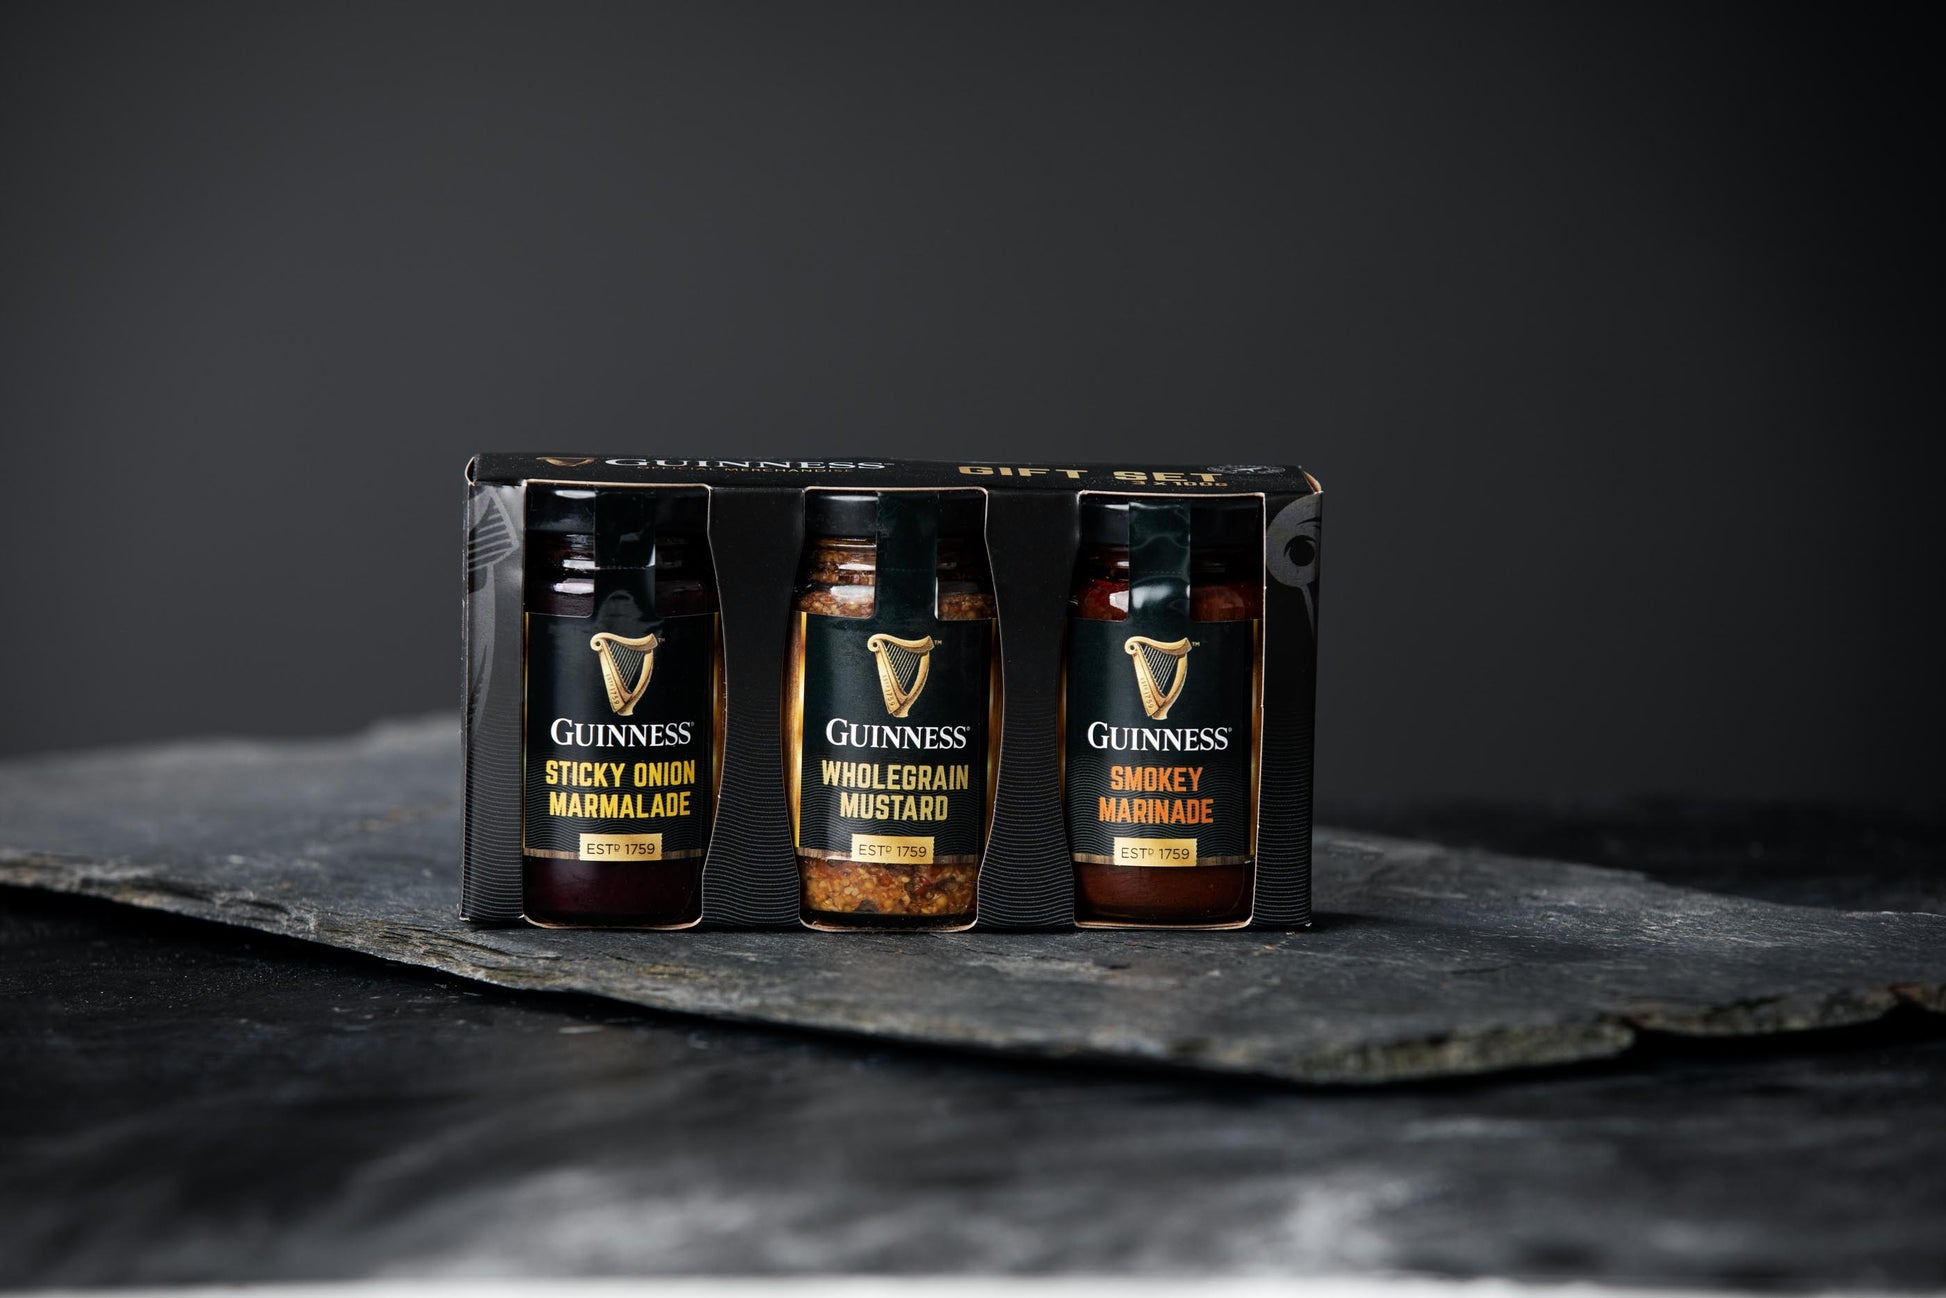 Three Guinness Foodstuff Gift Set 3 x 100g, including Guinness Wholegrain Mustard and Guinness Sticky Onion Marmalade, beautifully presented on a black slate.